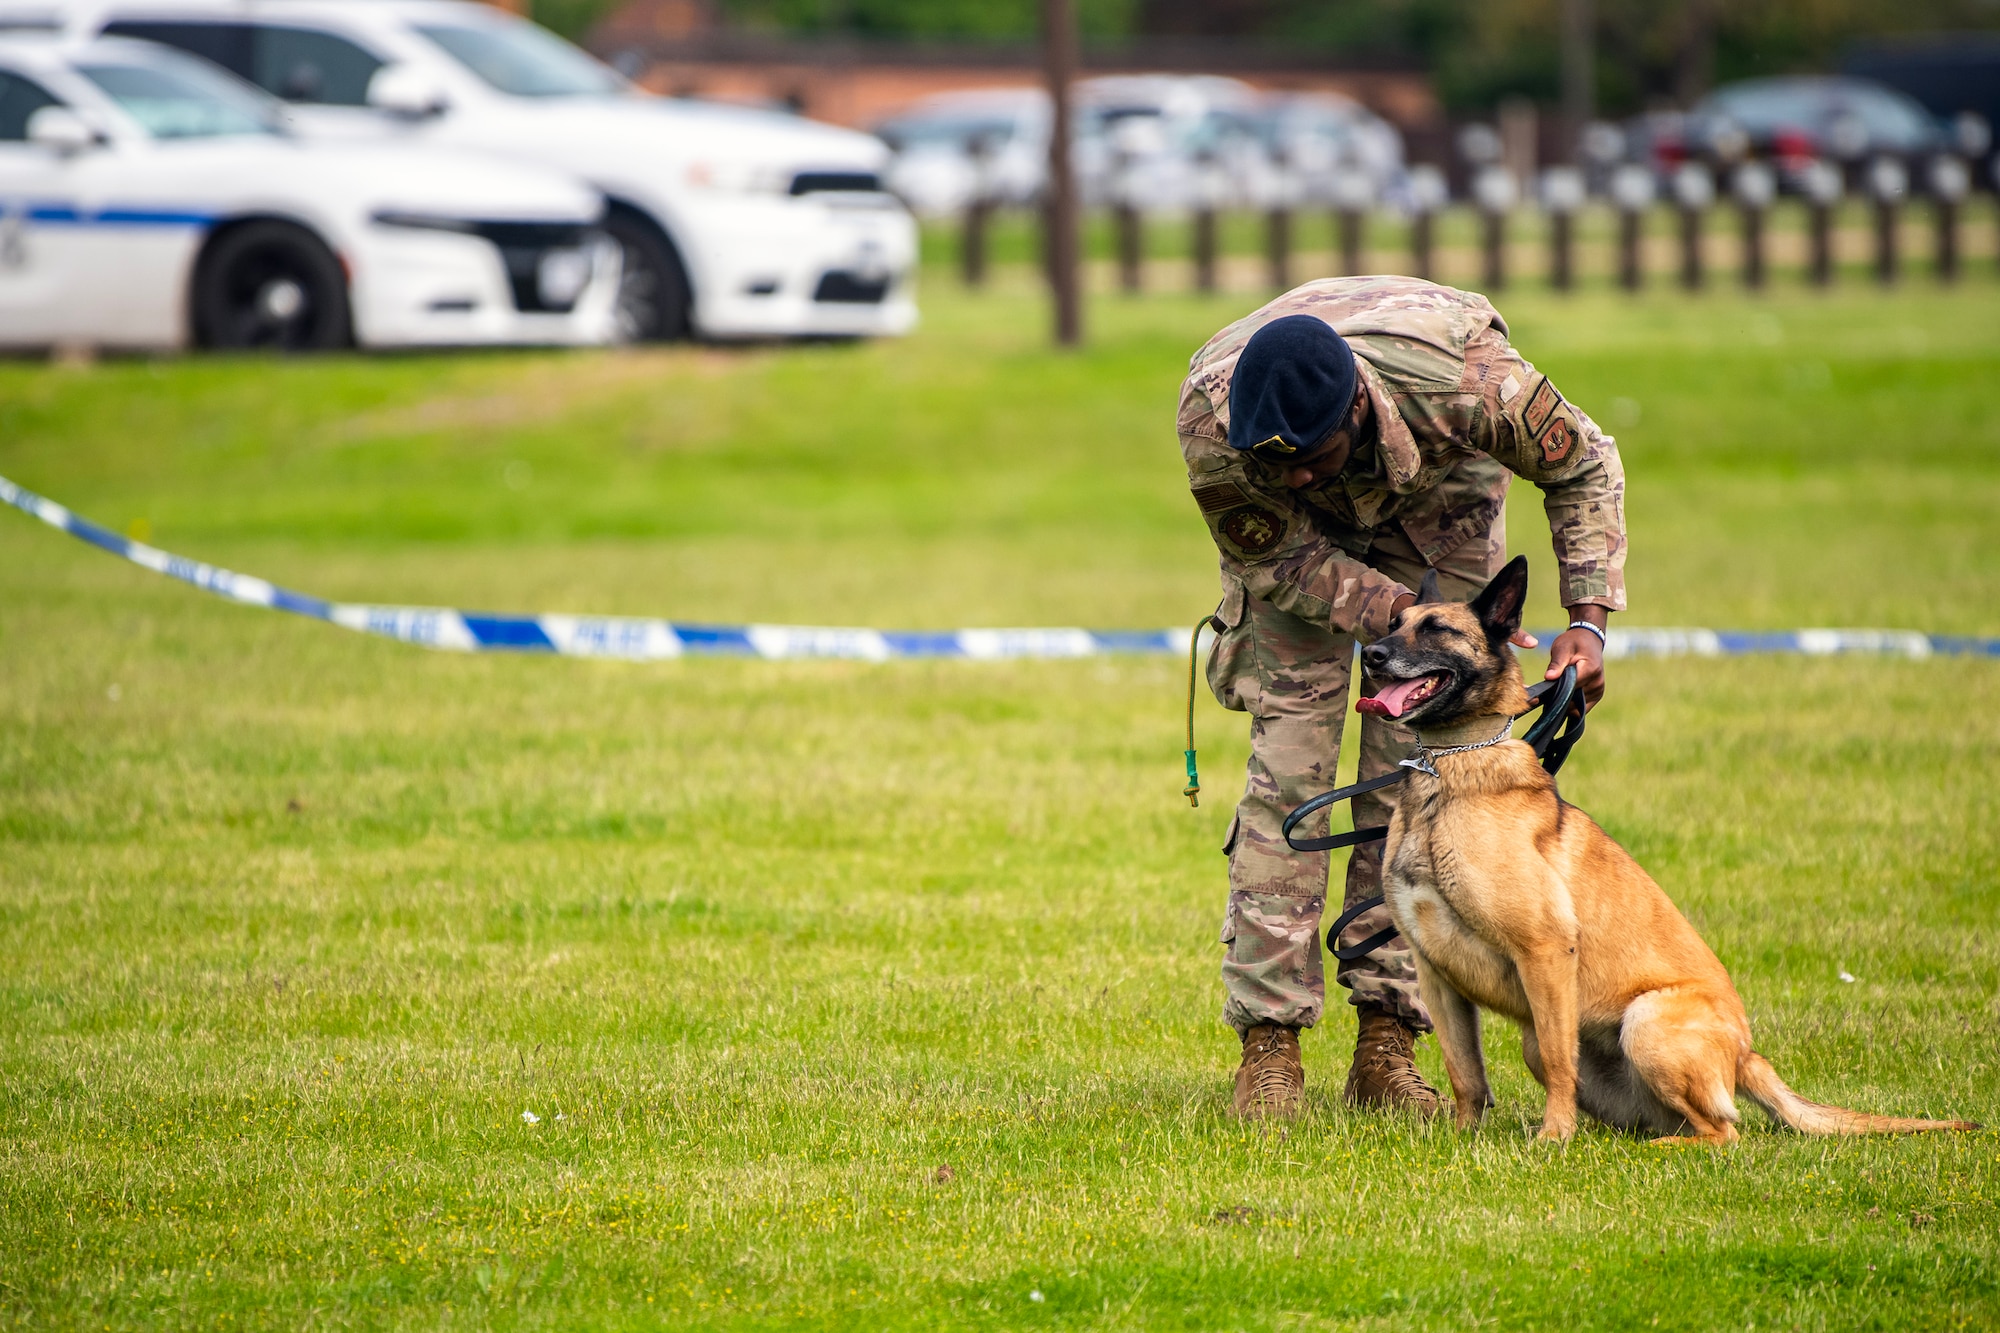 U.S. Air Force Senior Airman Jelani Bell, 100th Security Forces Squadron Military Working Dog handler, relays commands to MWD Uta, during a demonstration at RAF Alconbury, England, May 18, 2023. The demonstration was a part of National Police Week where members from SFS engaged with and demonstrated police capabilities to students from Alconbury Elementary school. (U.S. Air Force photo by Staff Sgt. Eugene Oliver)